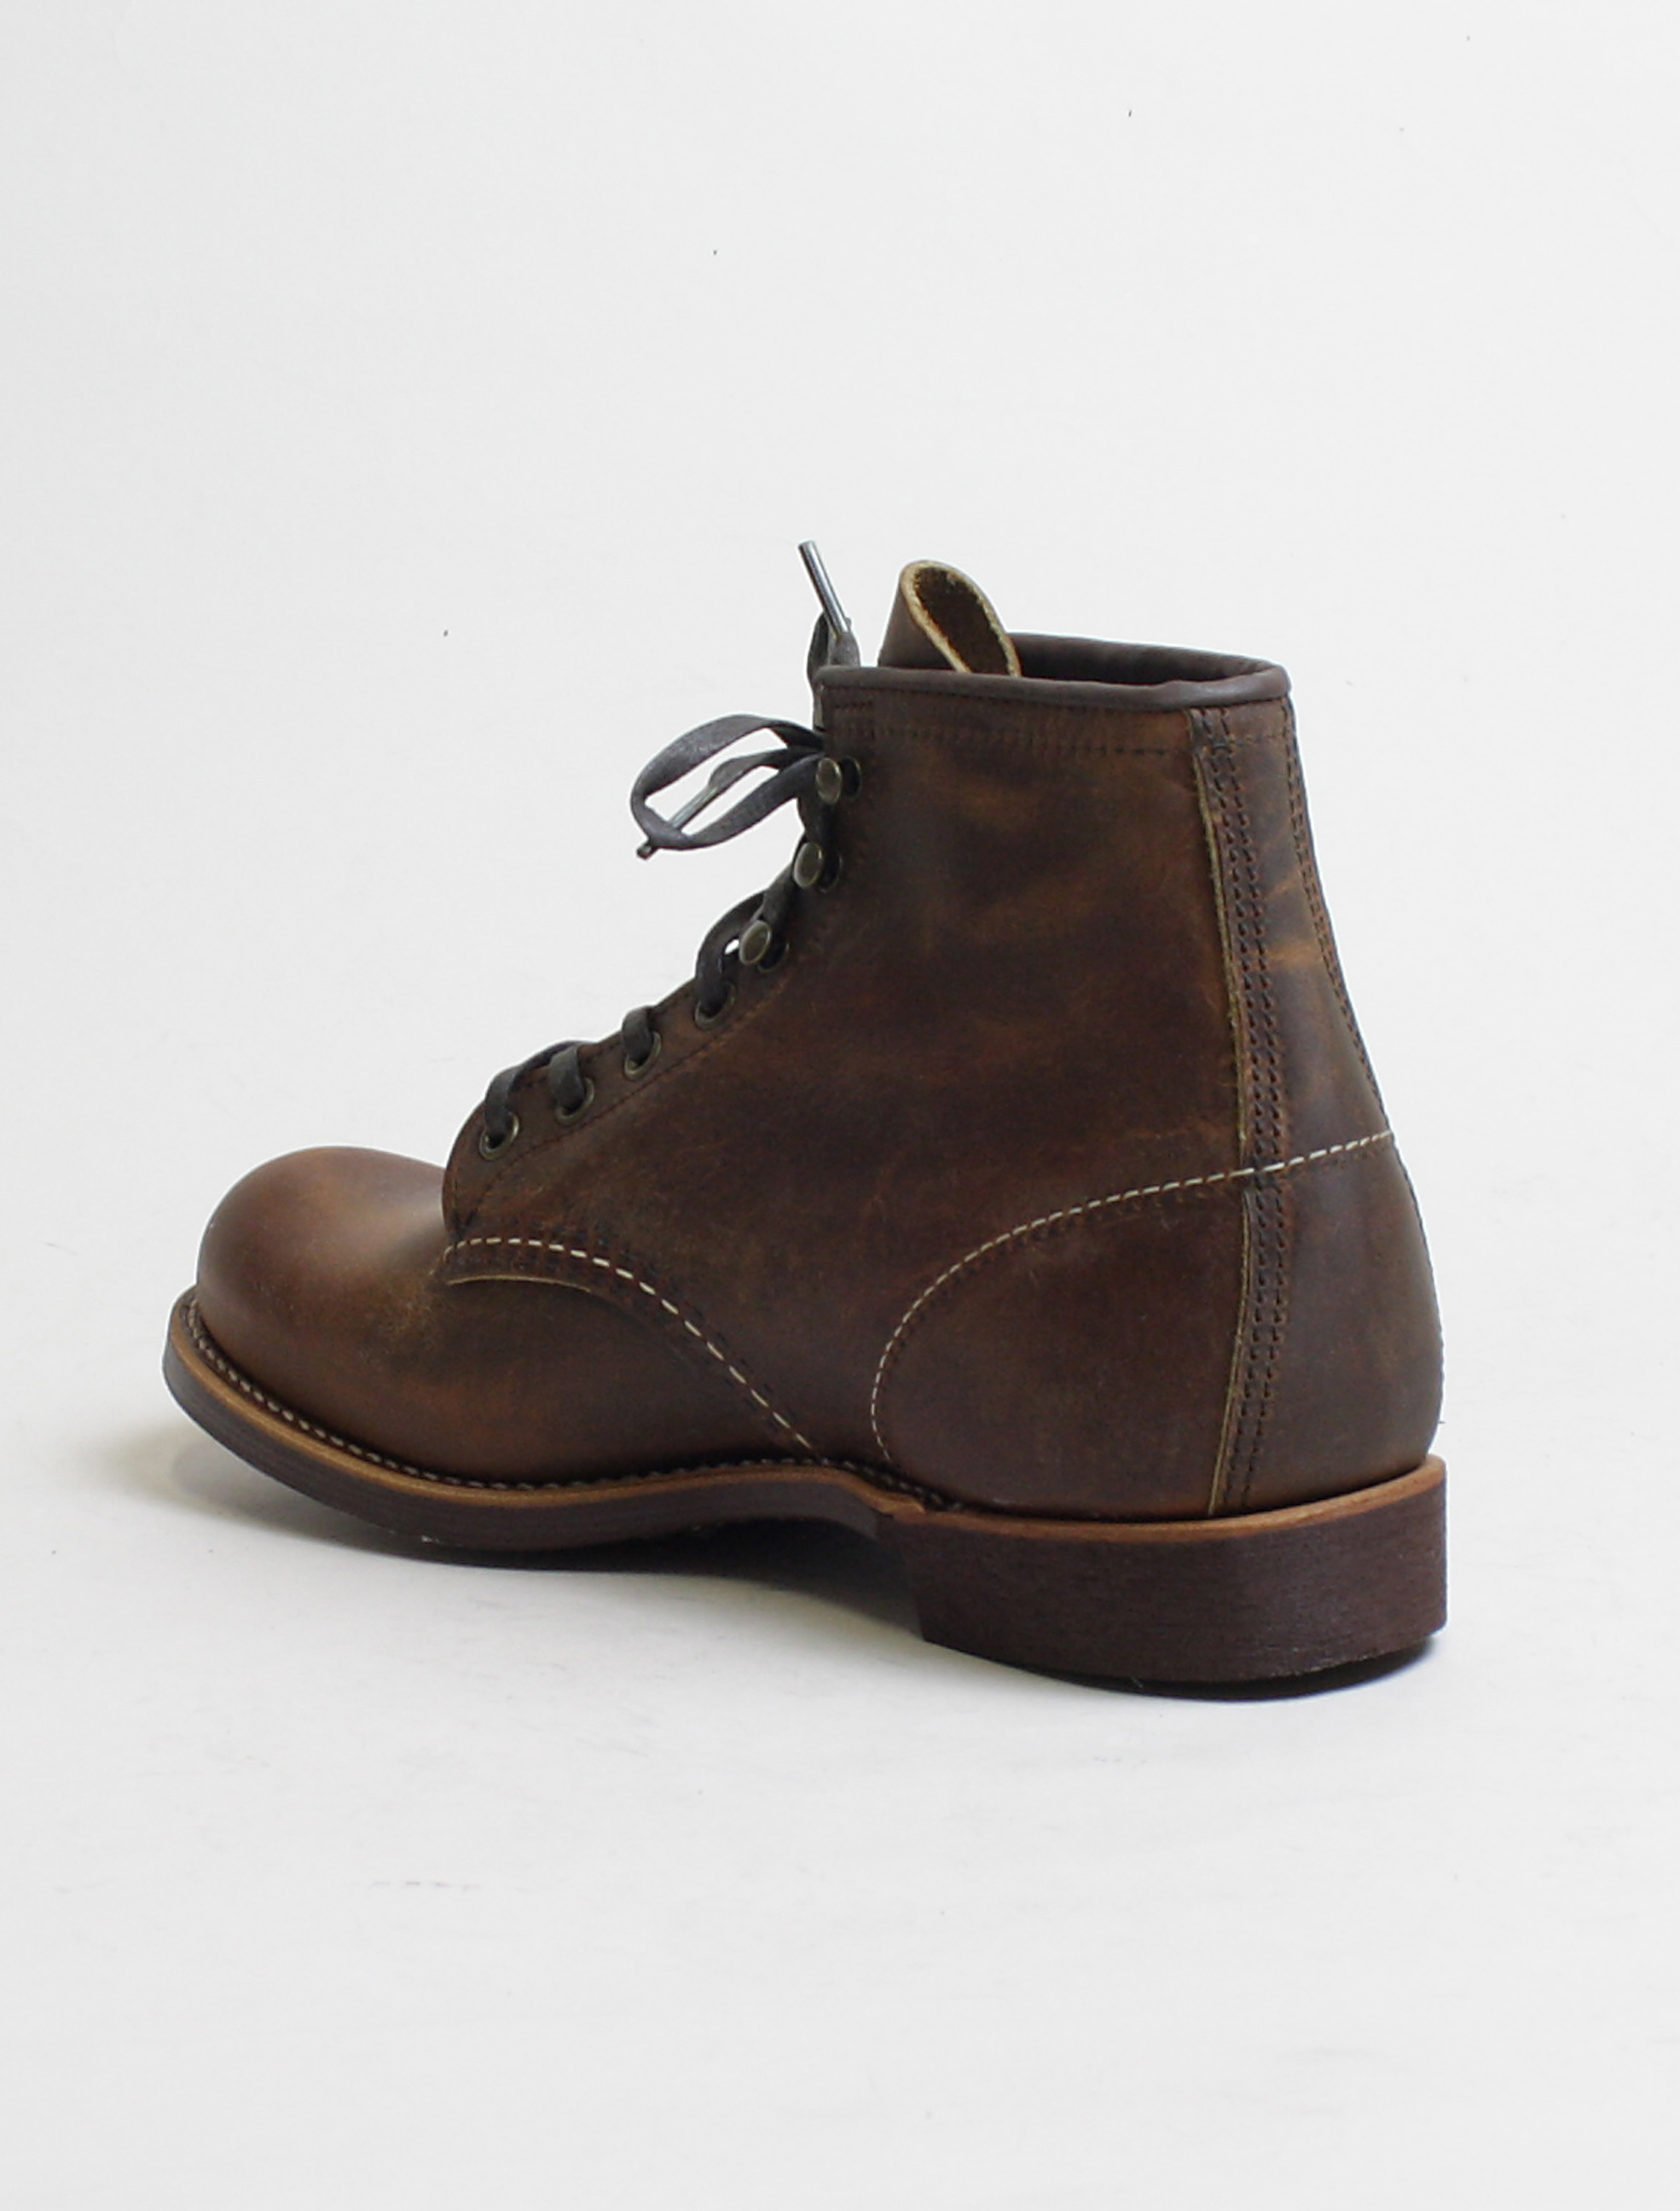 Red Wing 3343 Blacksmith Copper back detail